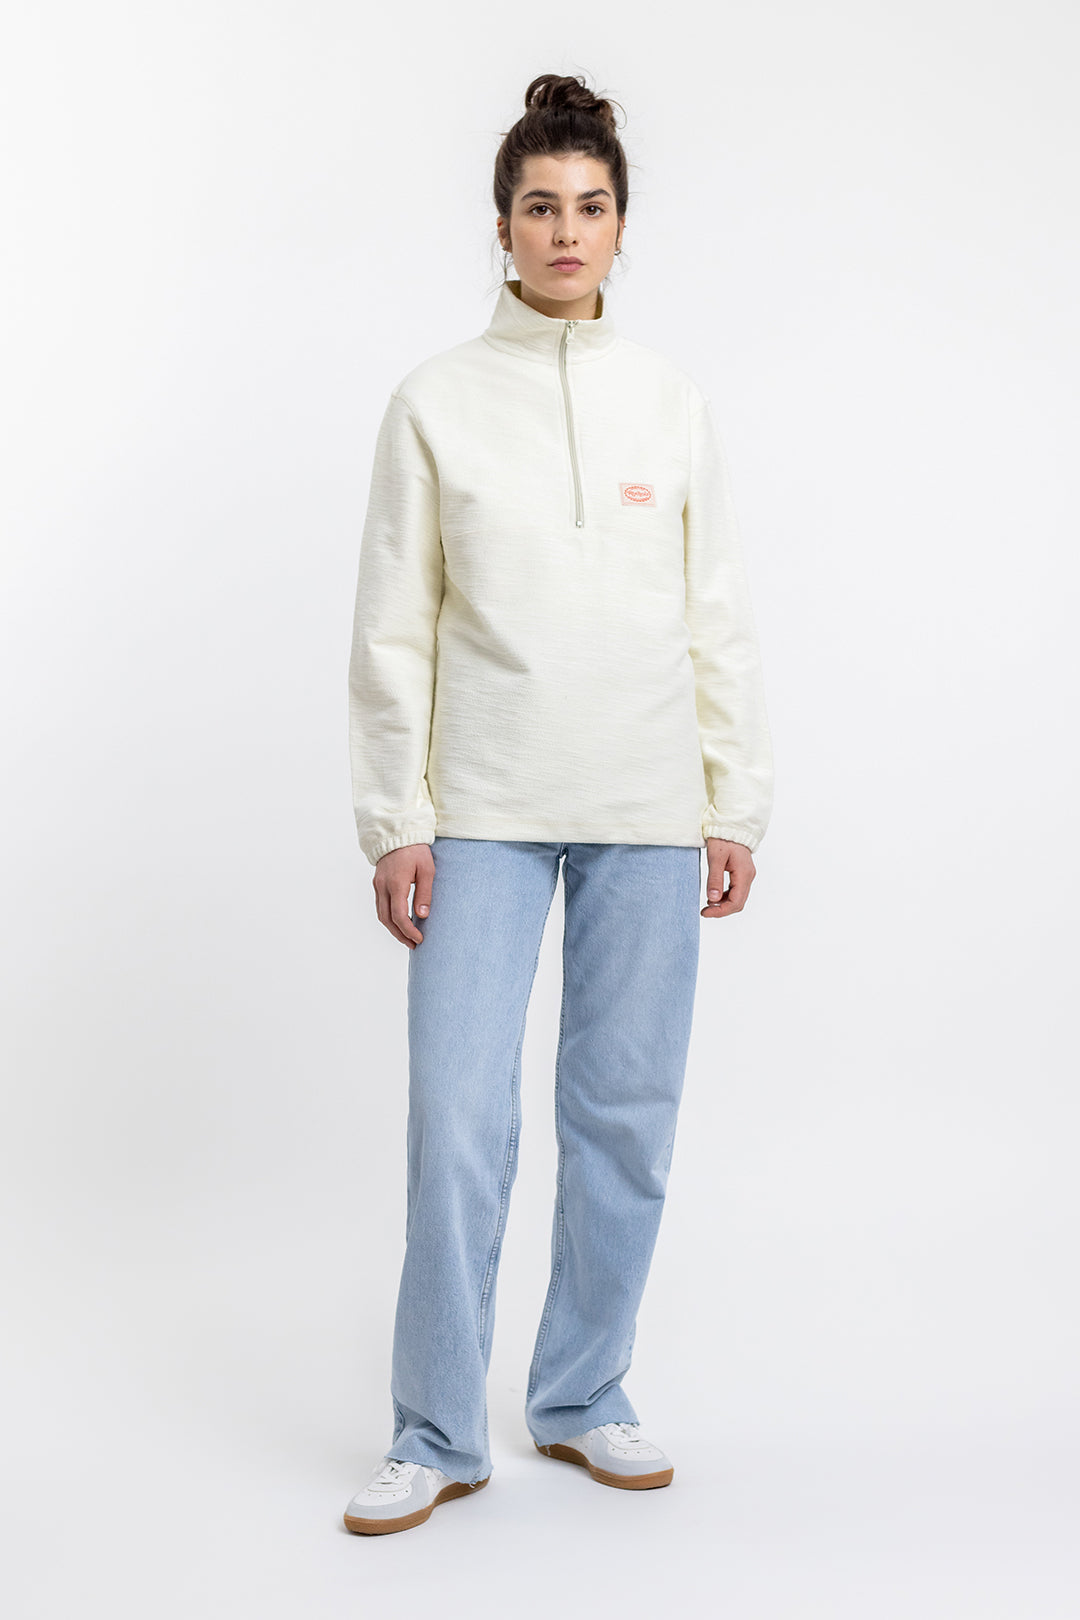 White zip-up sweatshirt Divided made of 100% cotton from Rotholz